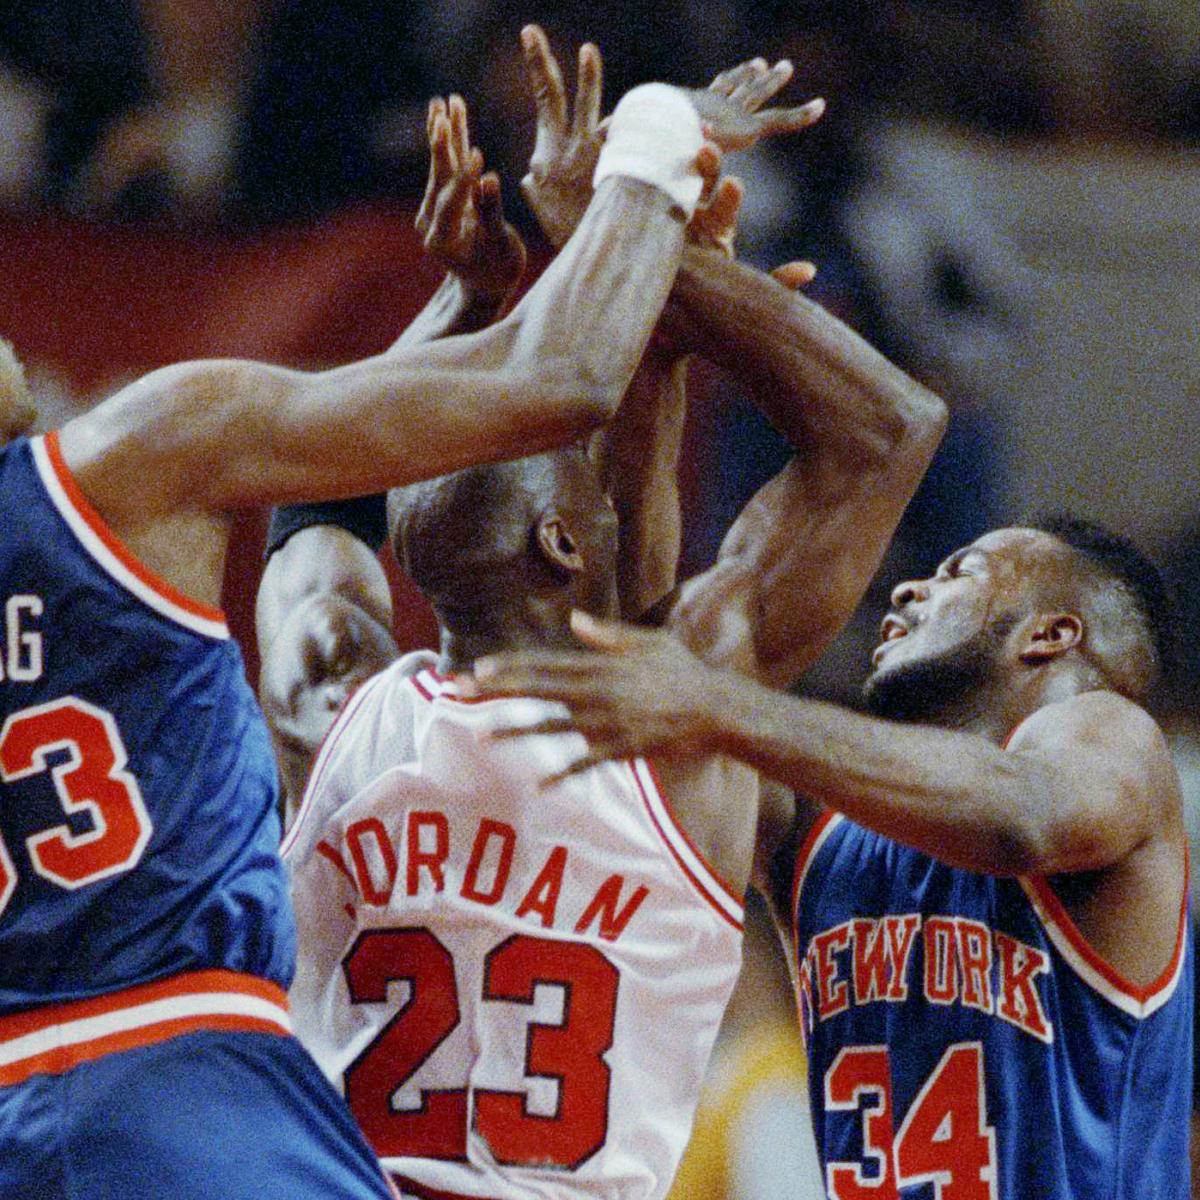 Charles Oakley Says Ewing Cost Knicks, Compares Michael Jordan to